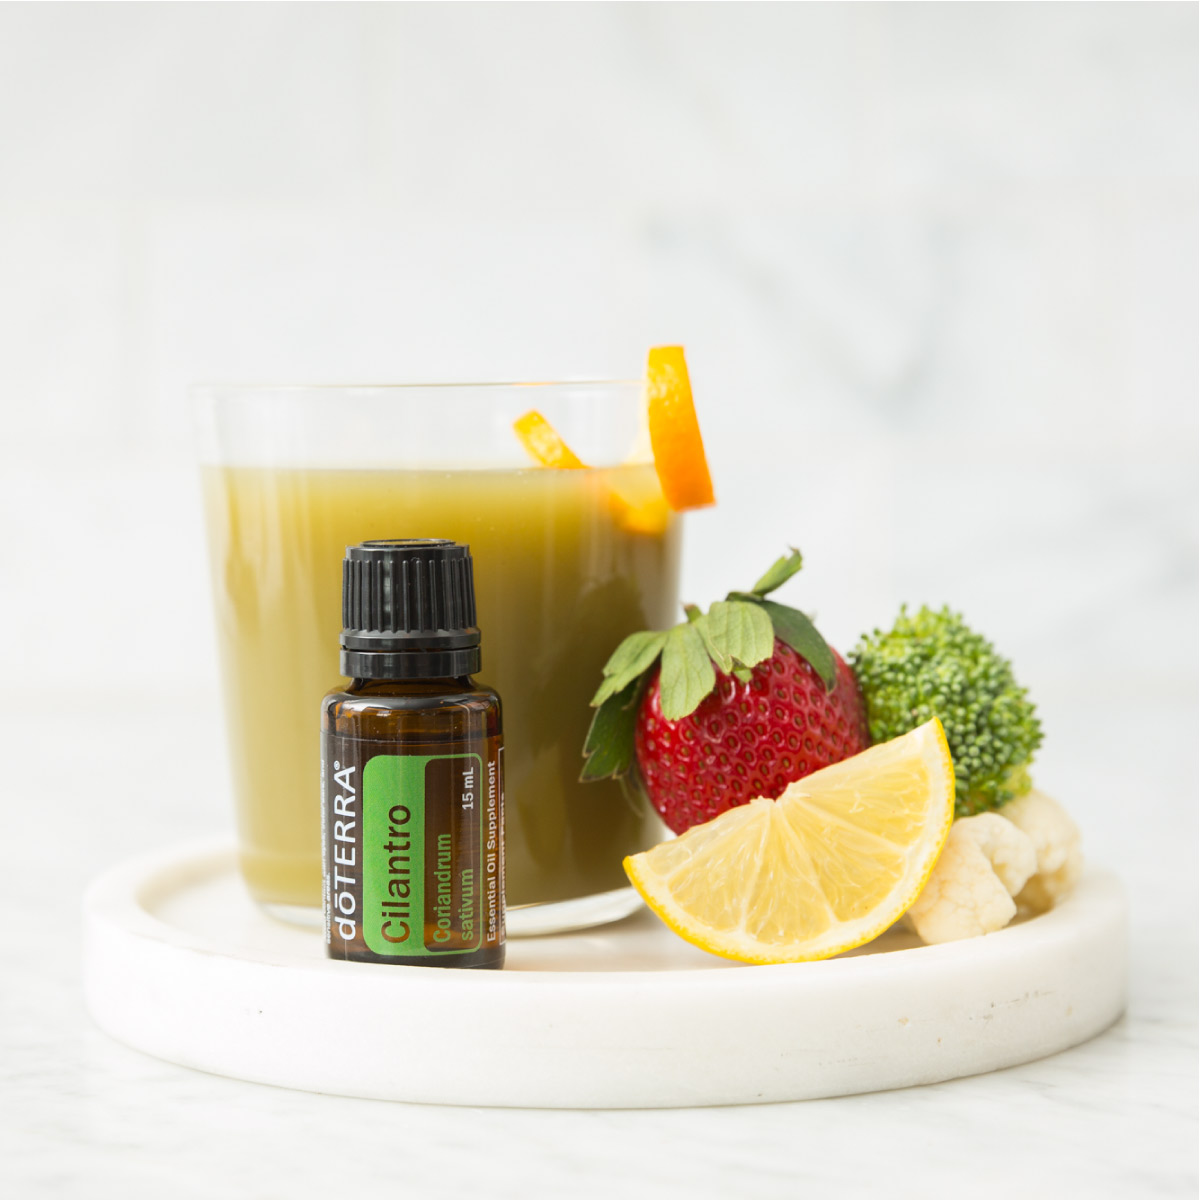 Bottle of Cilantro essential oil with healthy smoothie and slices of fresh fruit. Can you ingest Cilantro oil? Cilantro essential oil can be ingested when a safe amount is added to food or diluted in at least four ounces of liquid.